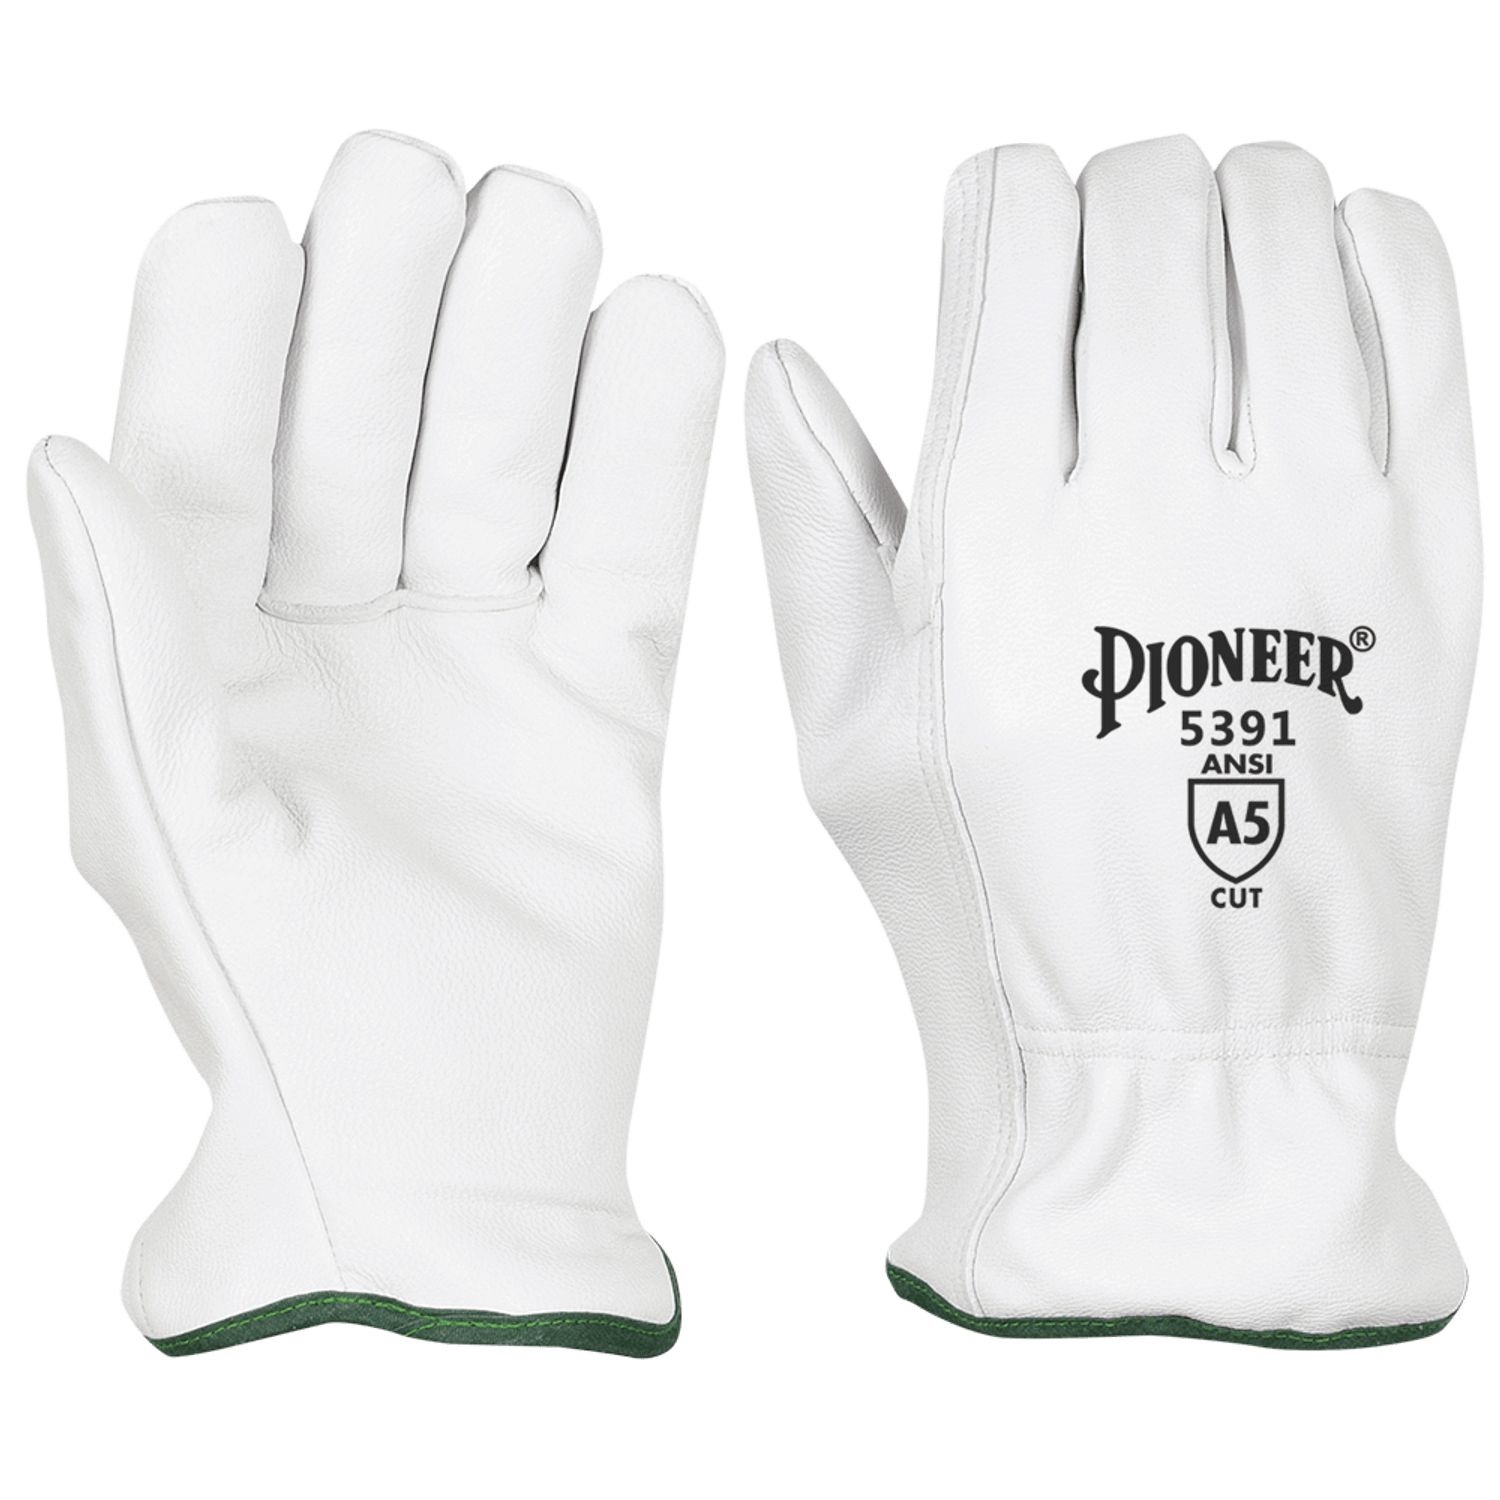 https://cdn11.bigcommerce.com/s-10f42/images/stencil/1500x1500/products/2550/5866/pioneer-cut-resistant-gloves-safetywear.ca__76663.1630252563.png?c=2